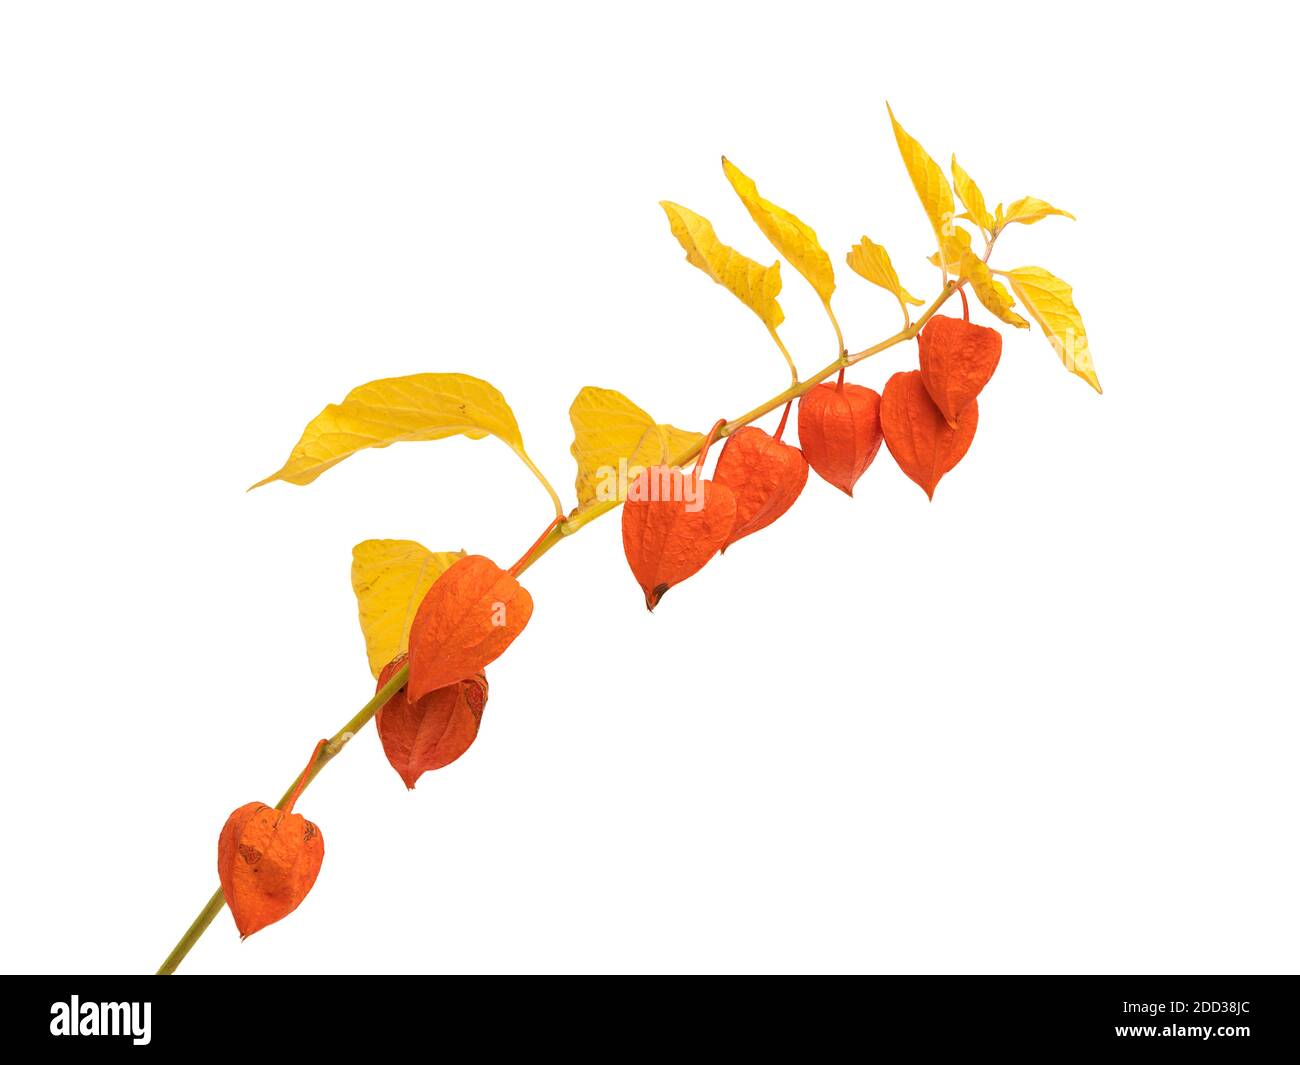 Wilting Physalis alkegengi or Chinese Lantern branch  full with fruits isolated on white background Stock Photo